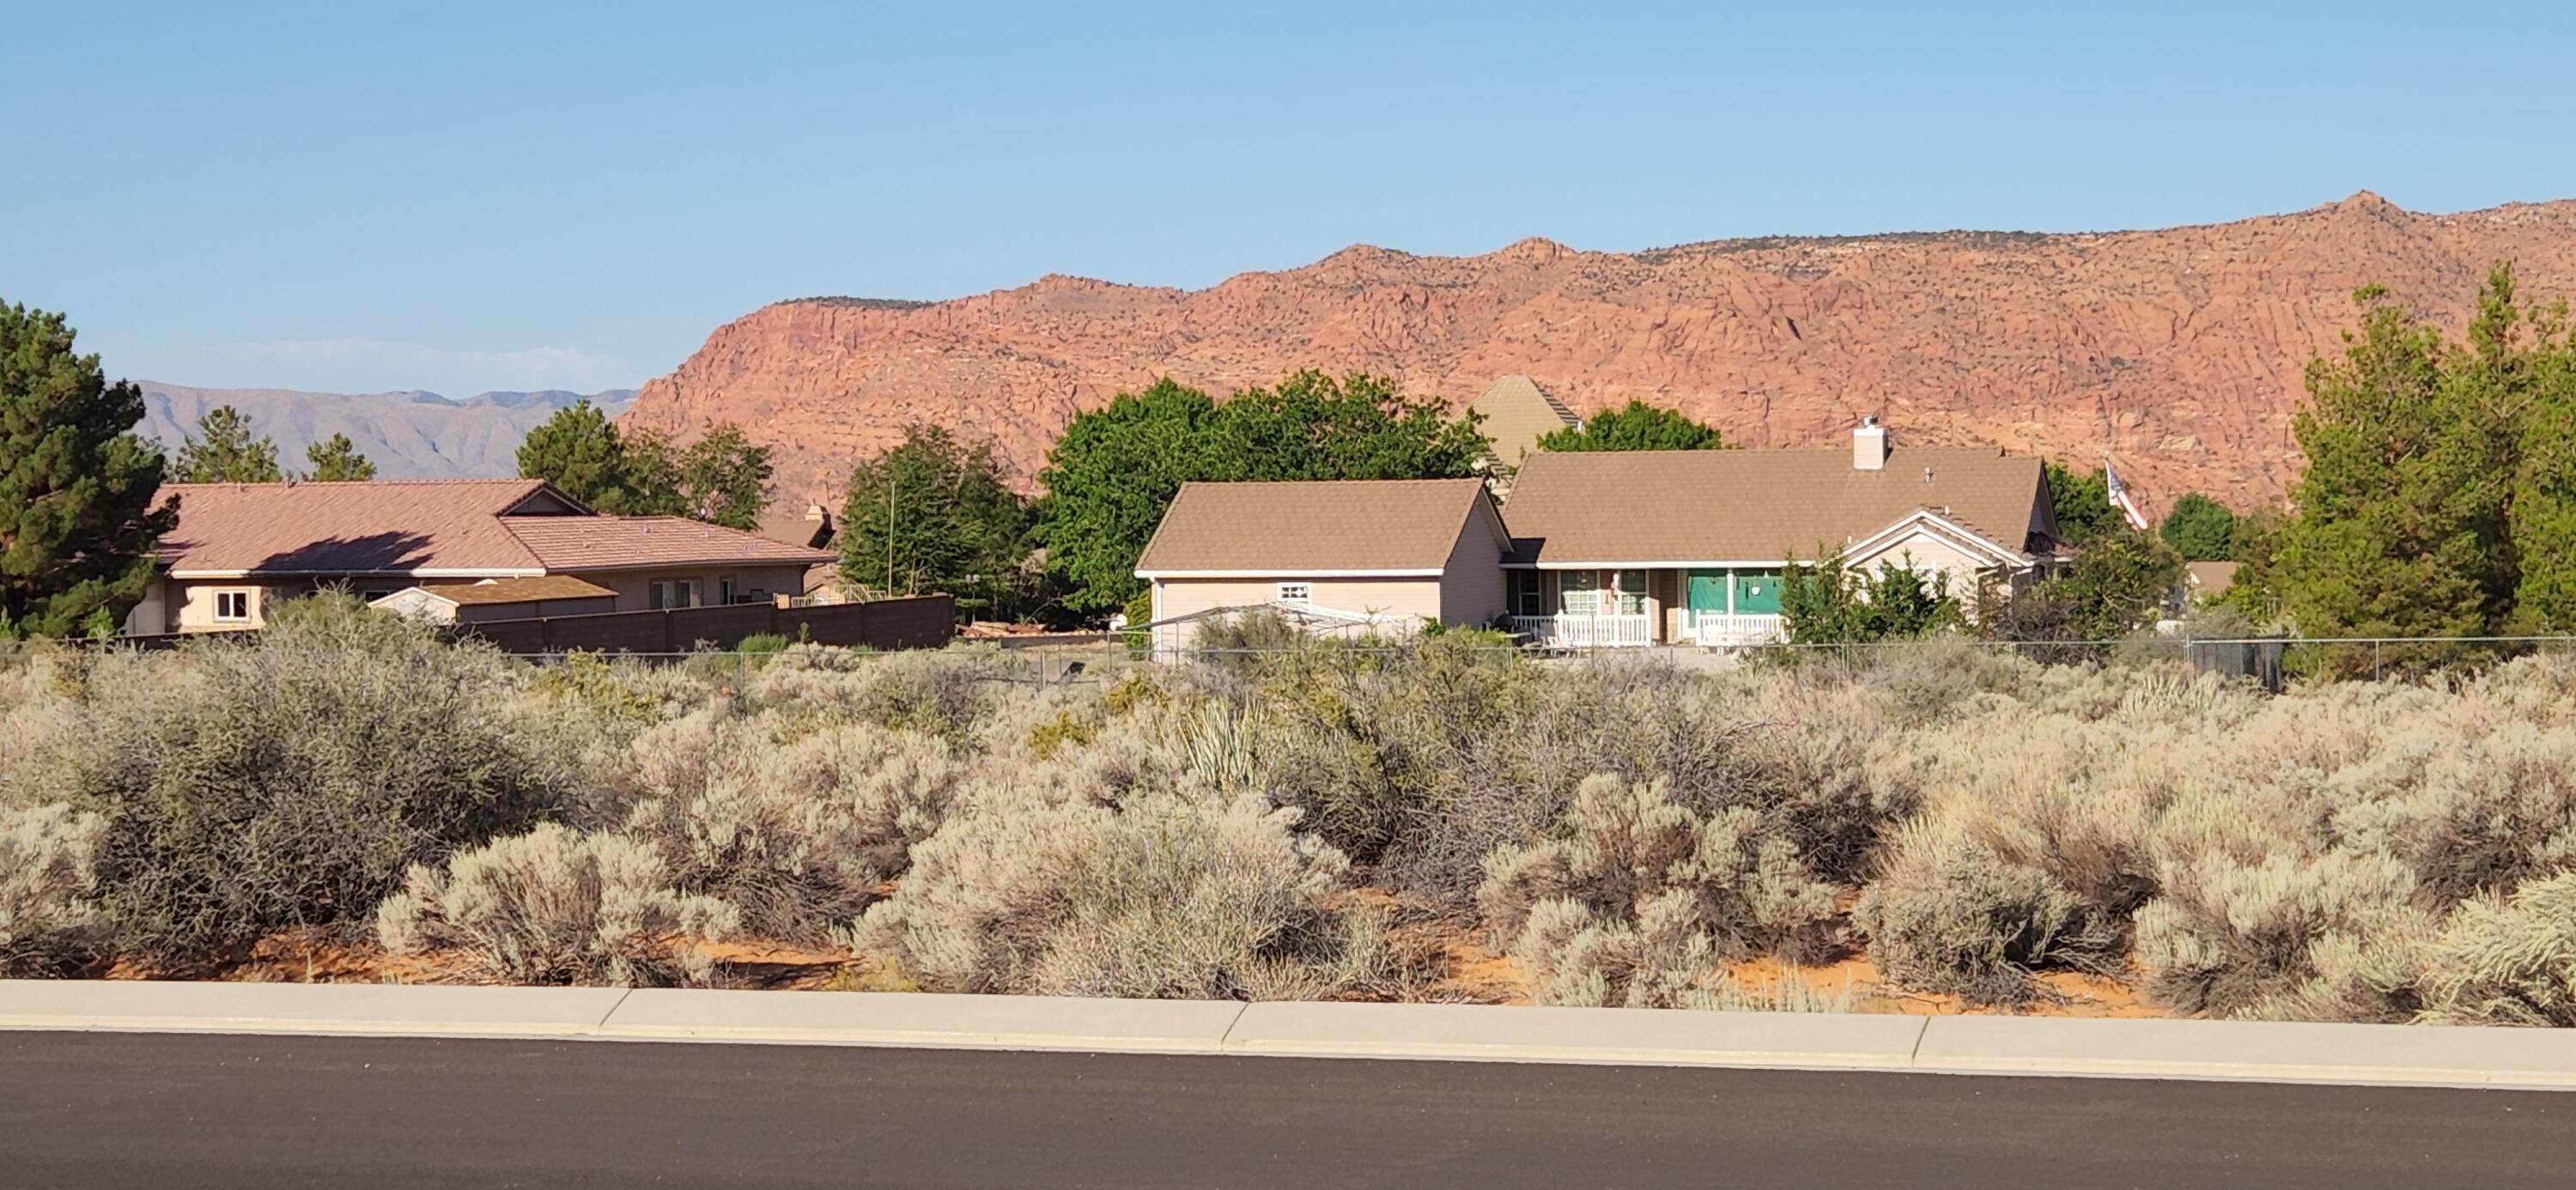 Land for Sale at Johnson Arch Drive St. George, Utah 84770 United States